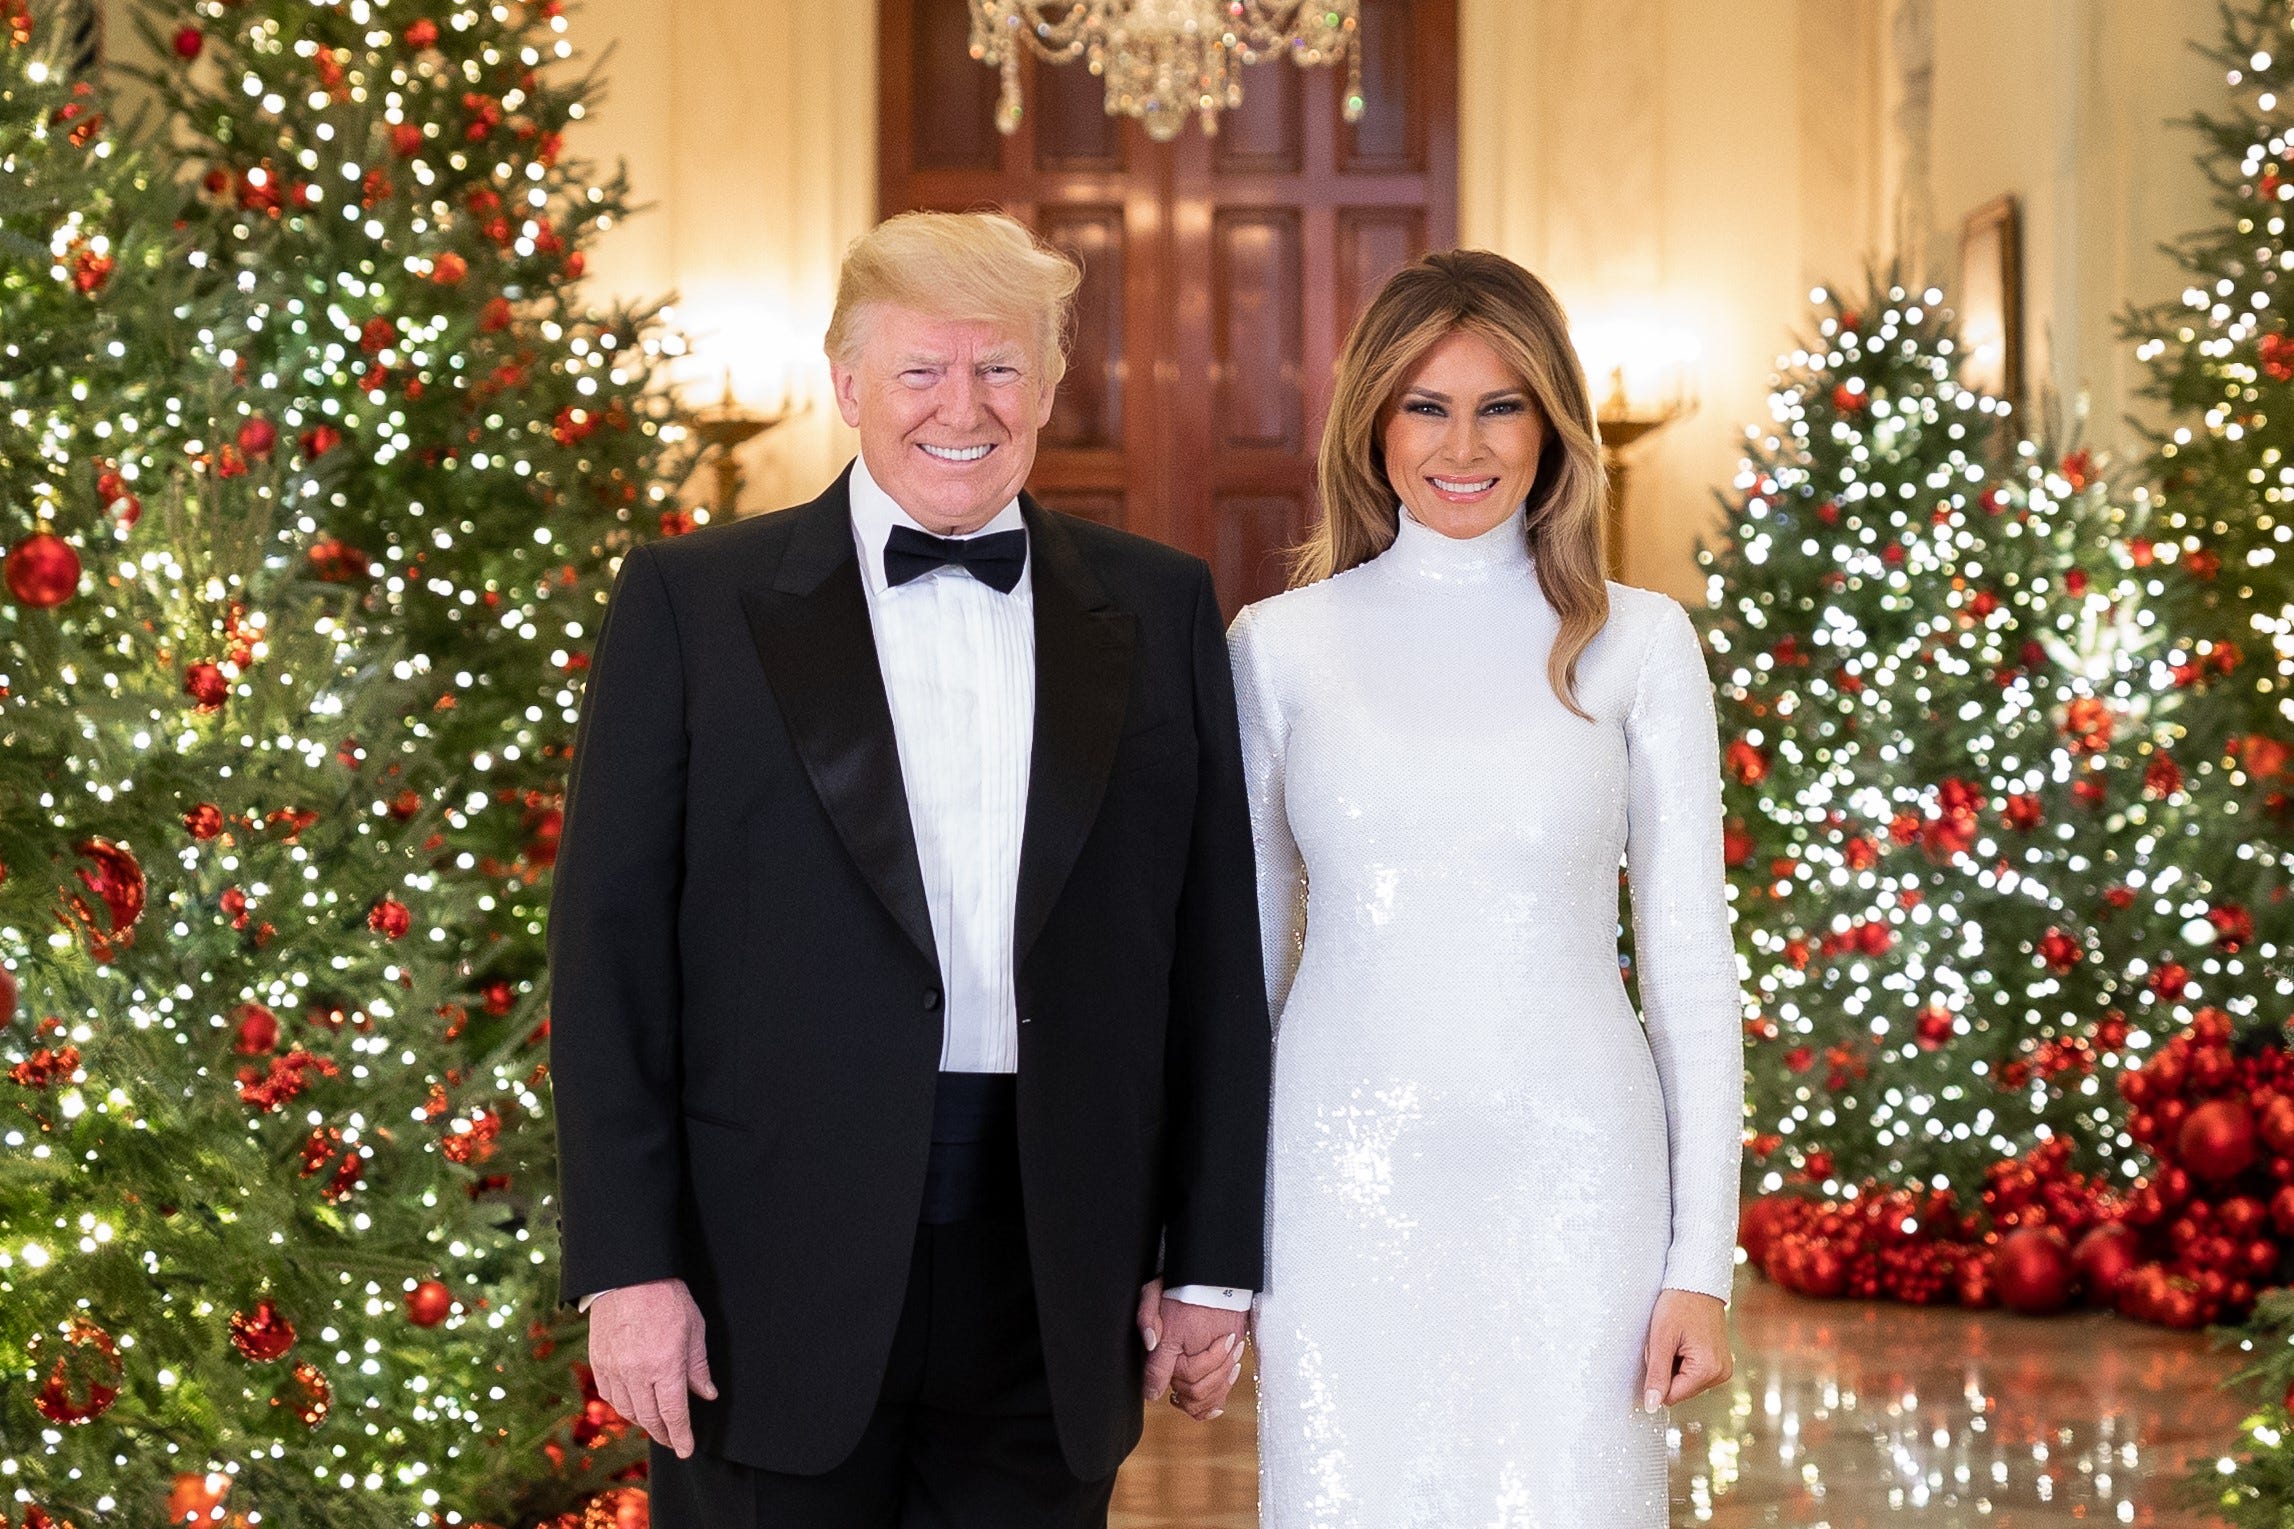 Trump signs executive order giving employees time off on Christmas Eve